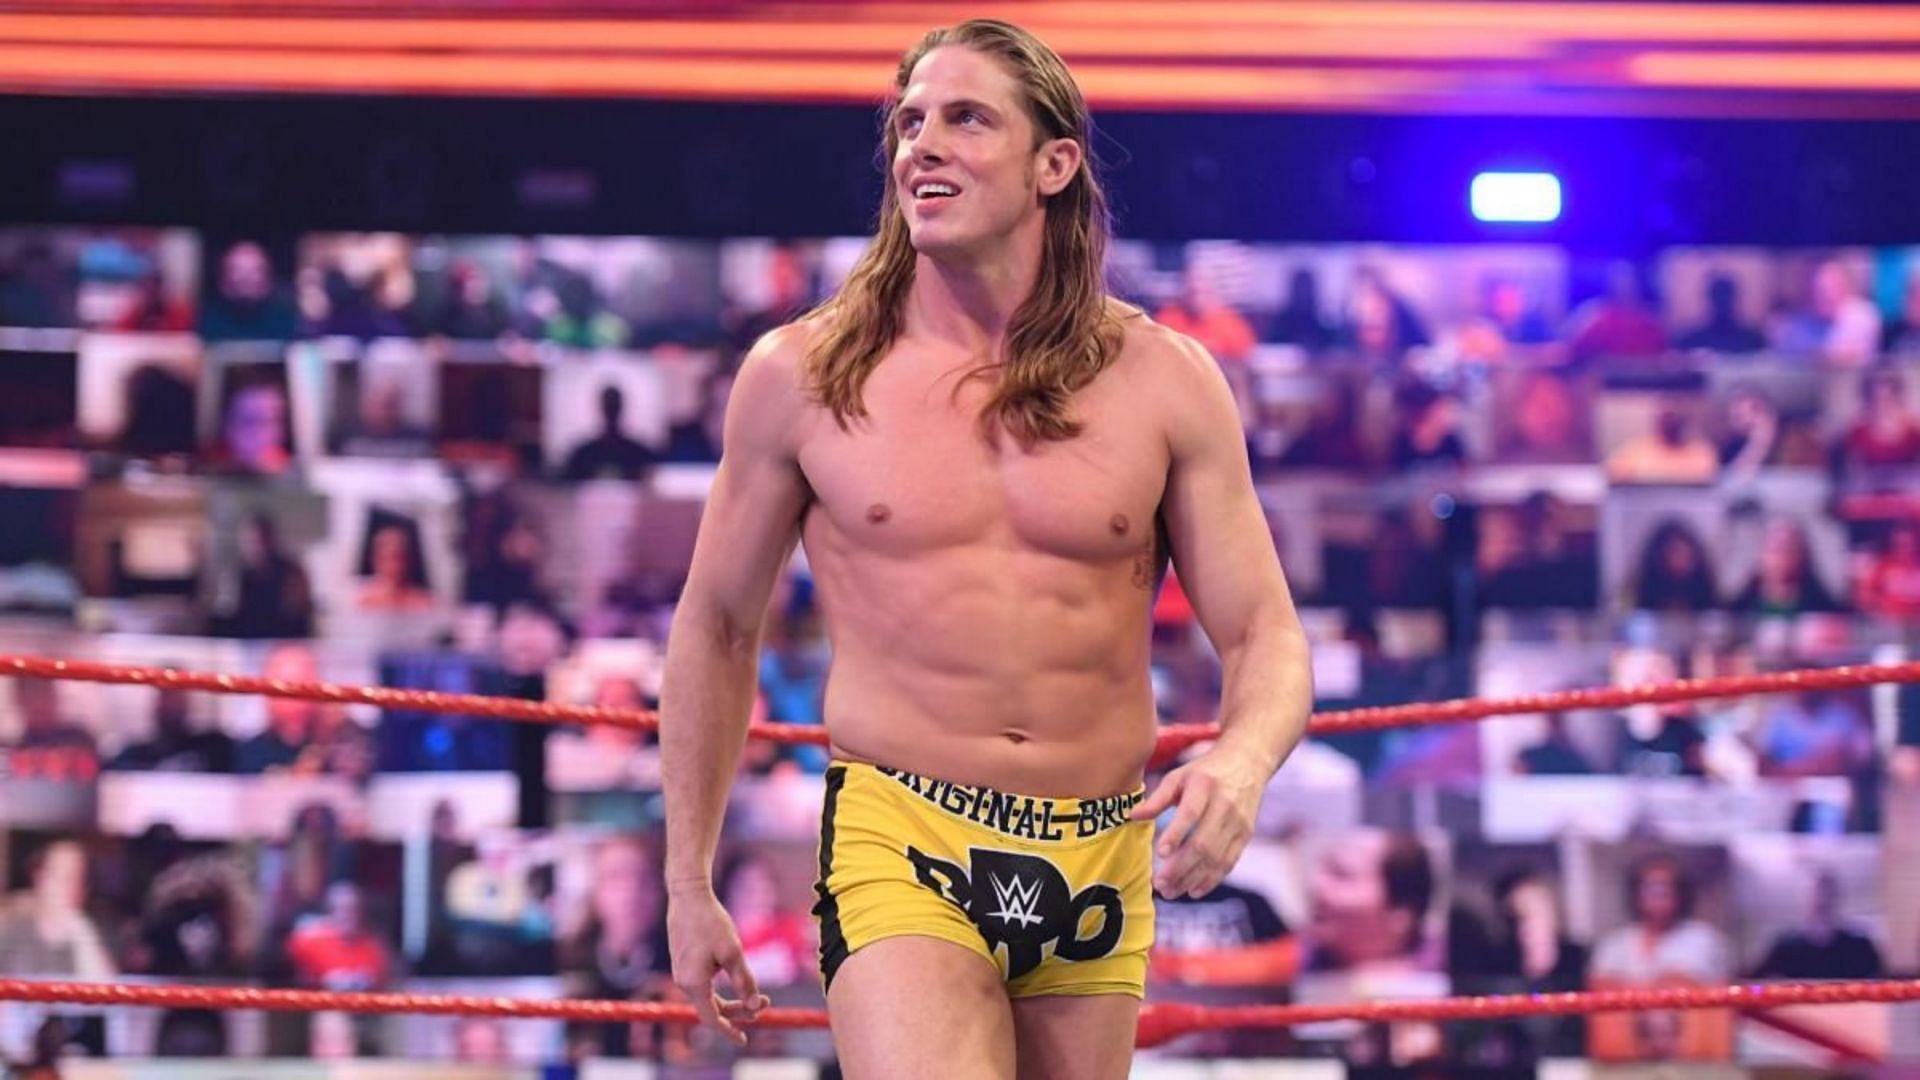 Riddle believes Vince McMahon respects his confidence and hard work